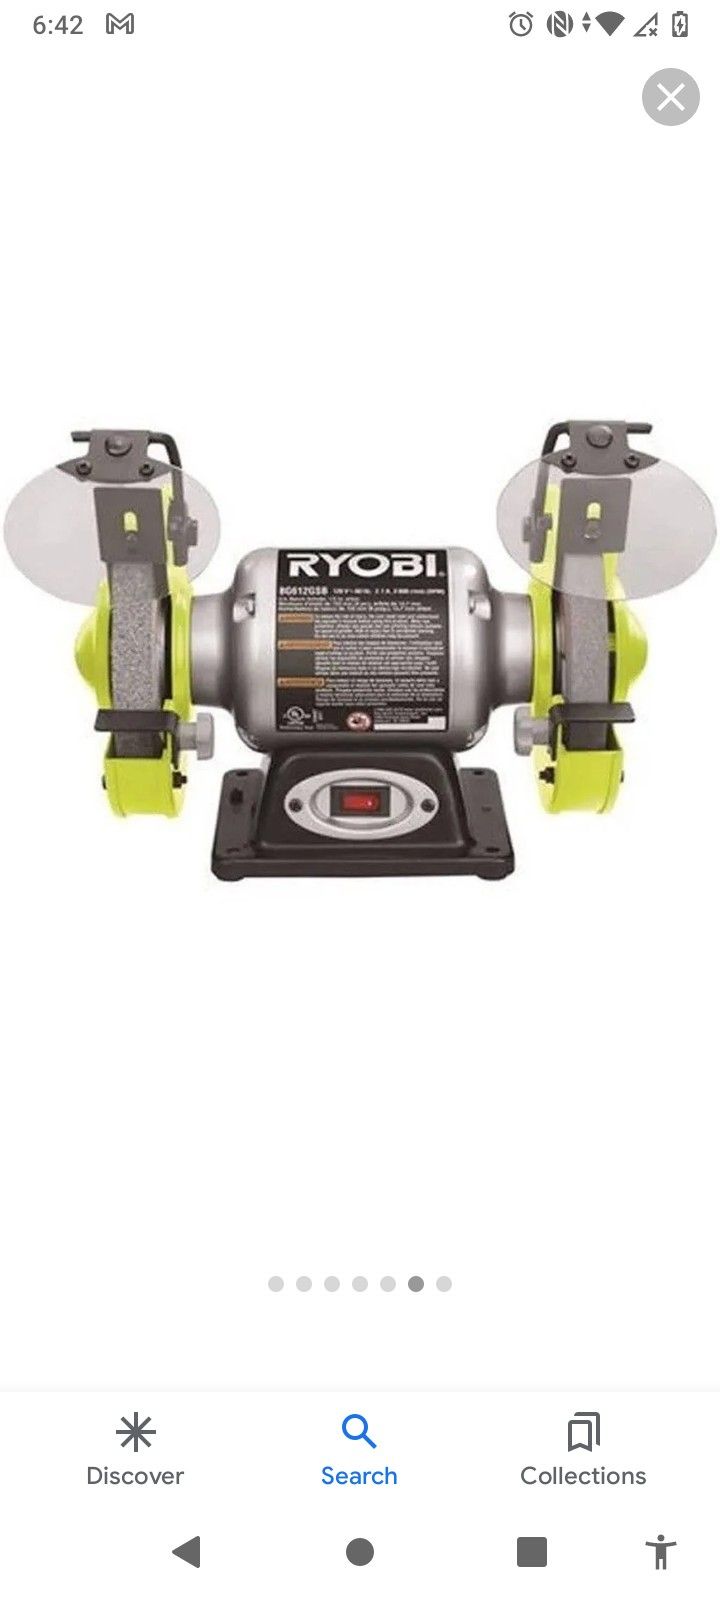 NEW Ryobi 2.1 Amp 6 in. Grinder with LED Lights